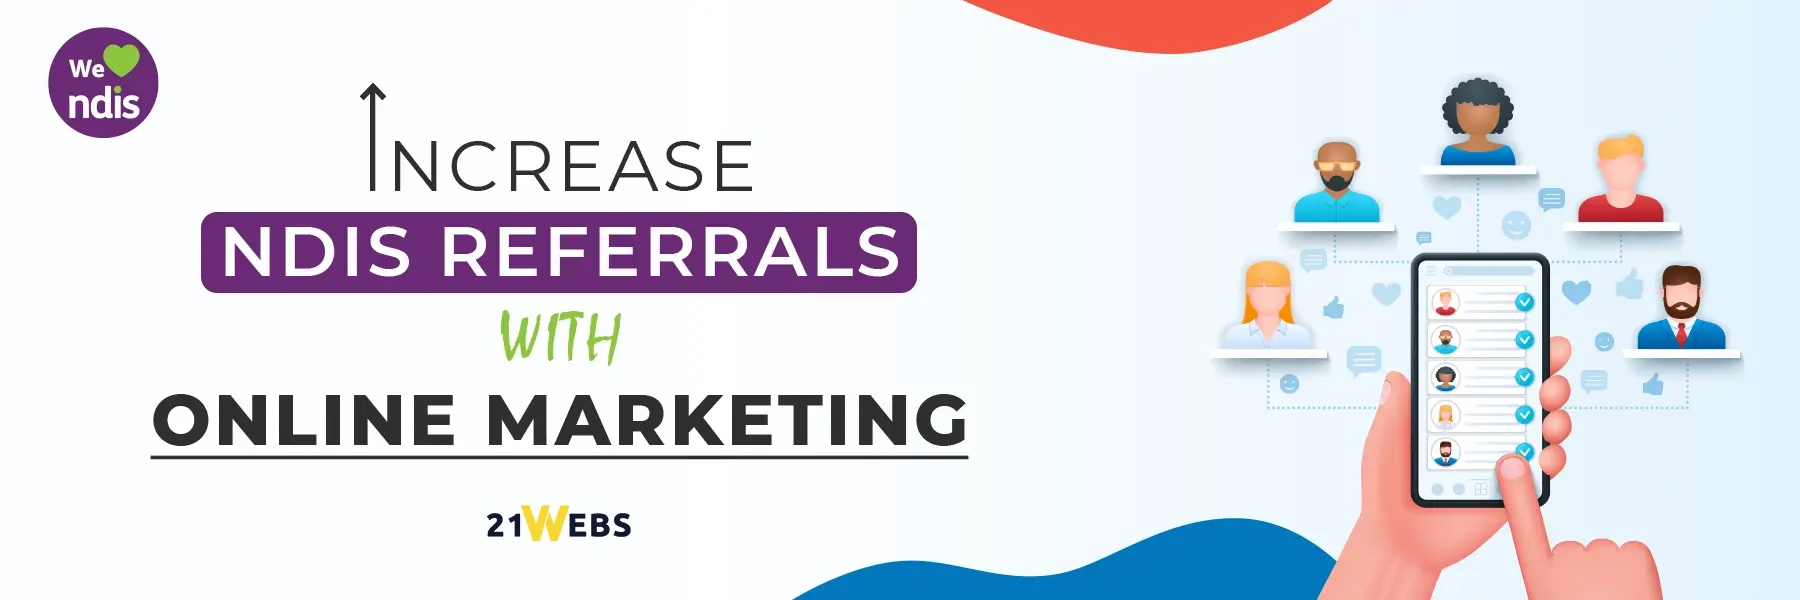 Increase NDIS Referrals with Online Marketing